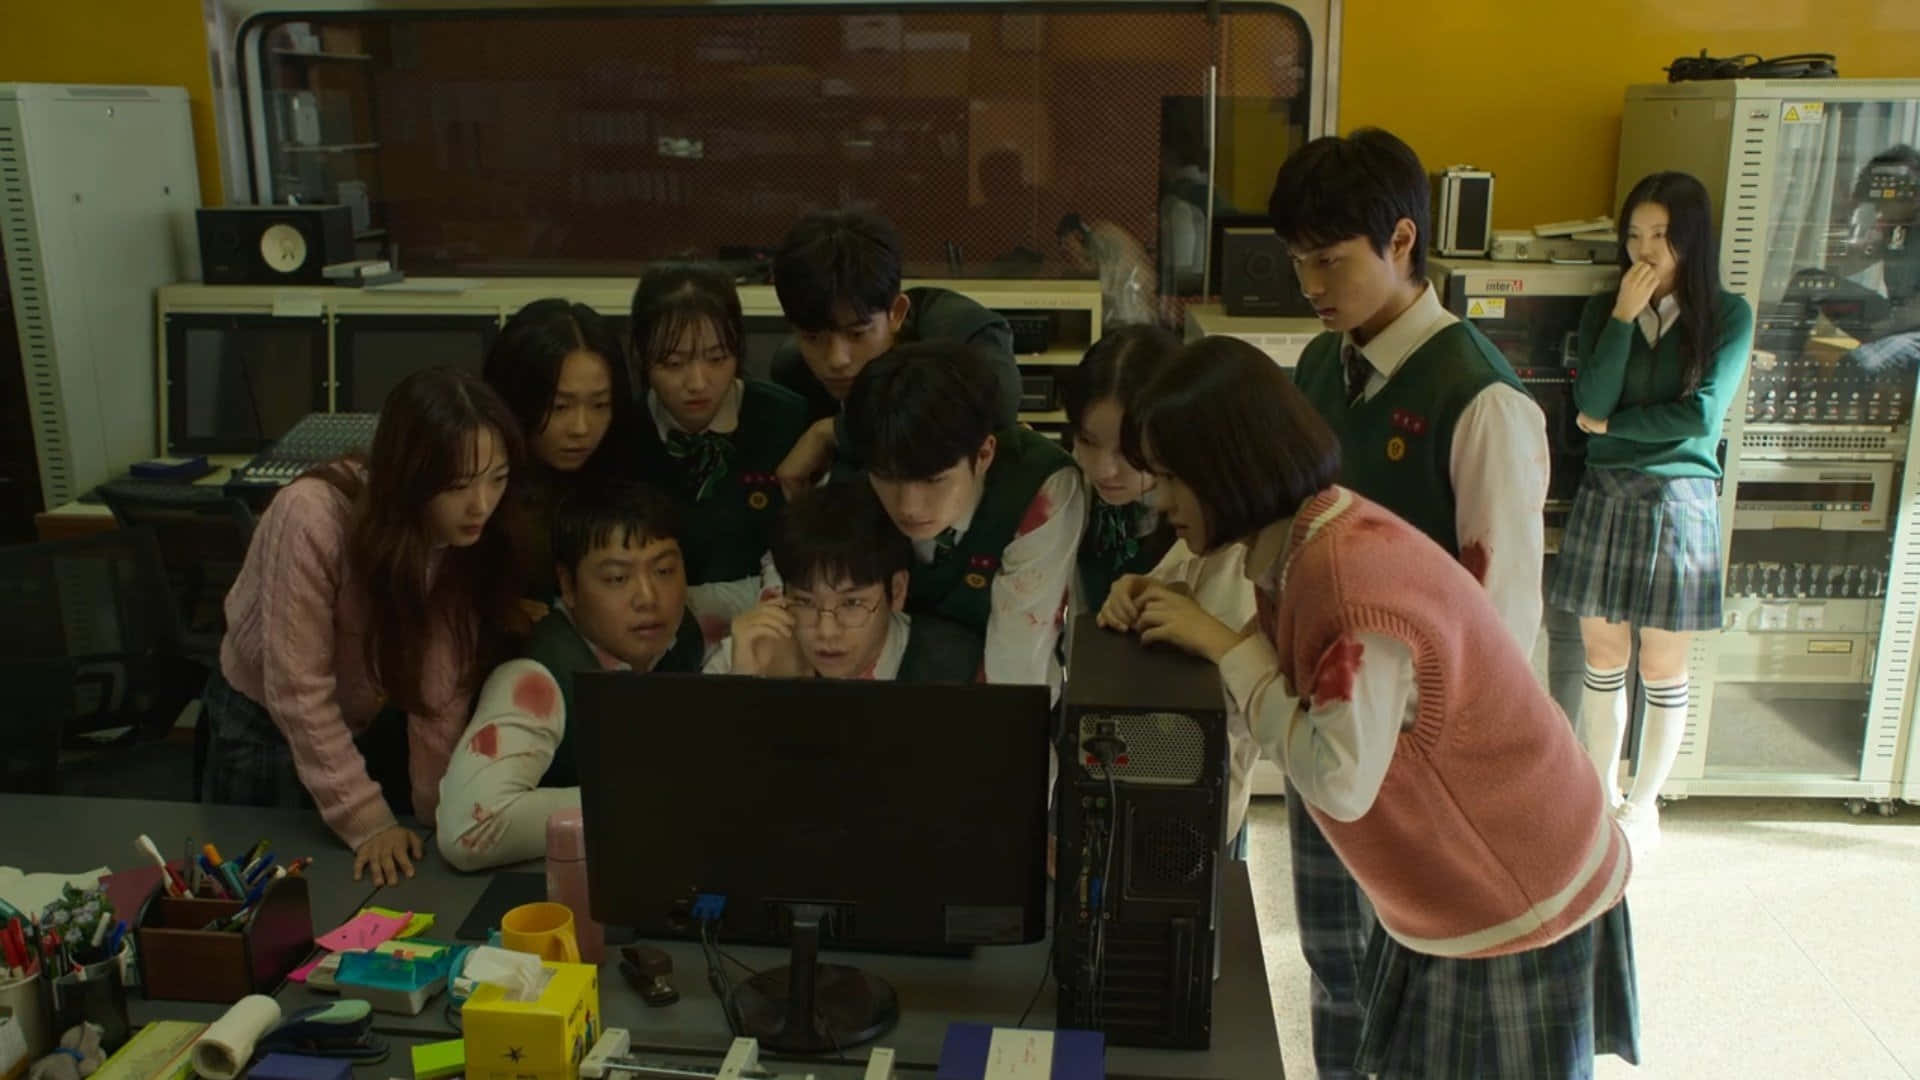 A Group Of School Students Looking At A Computer